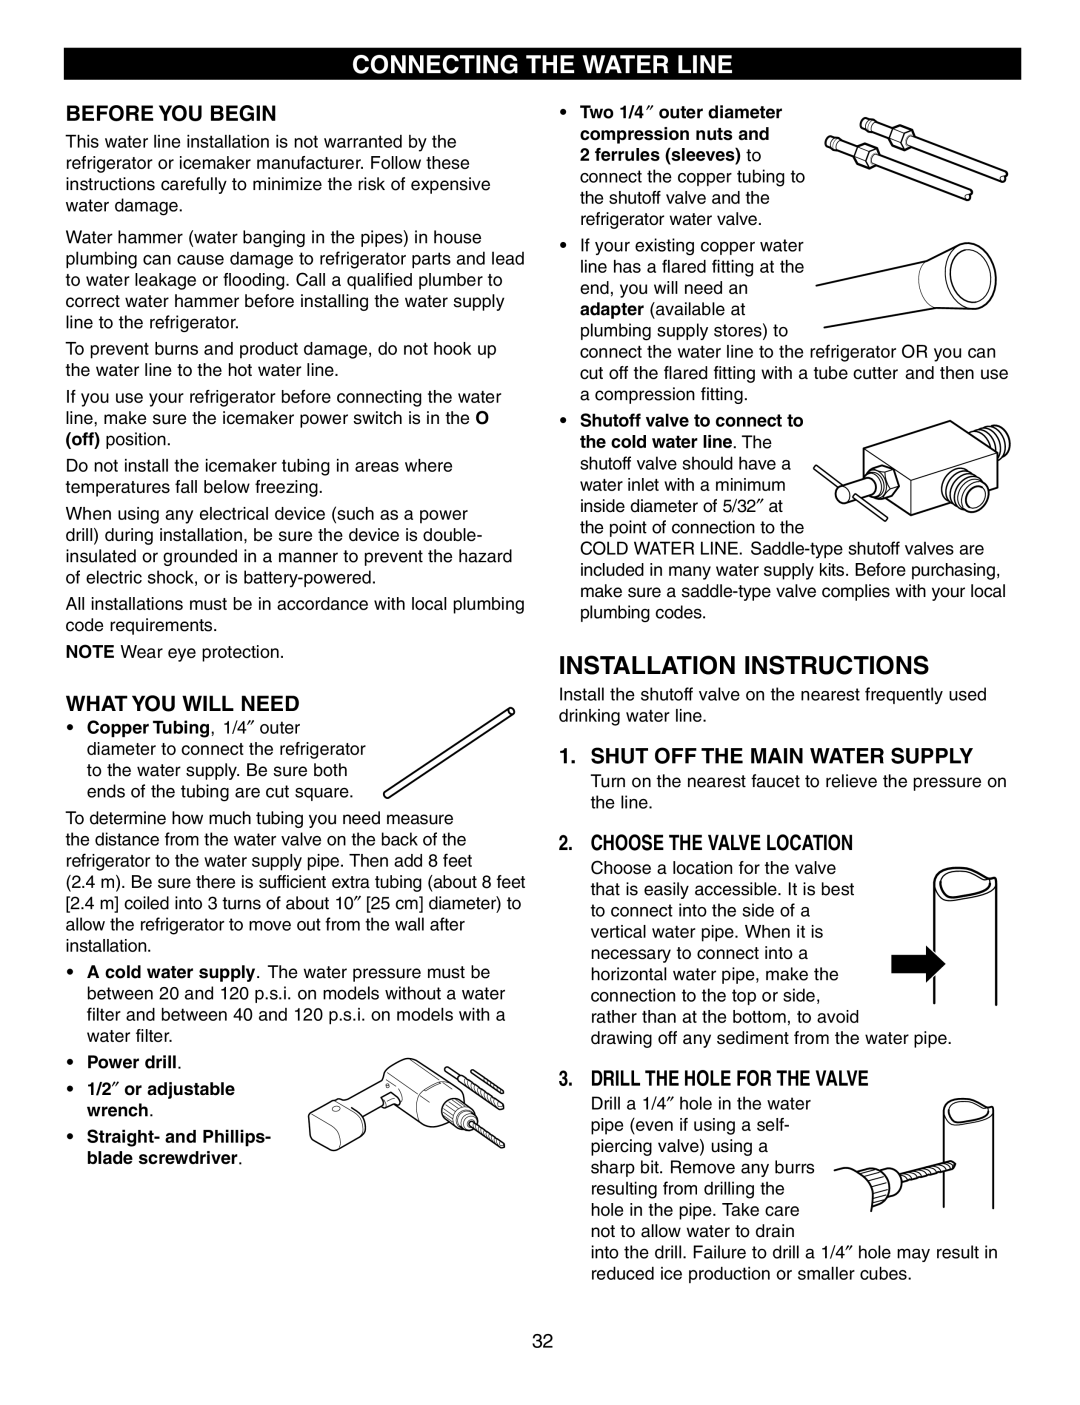 LG Electronics LFX25950 manual Connecting The Water Line, Installation Instructions, Before You Begin, What You Will Need 